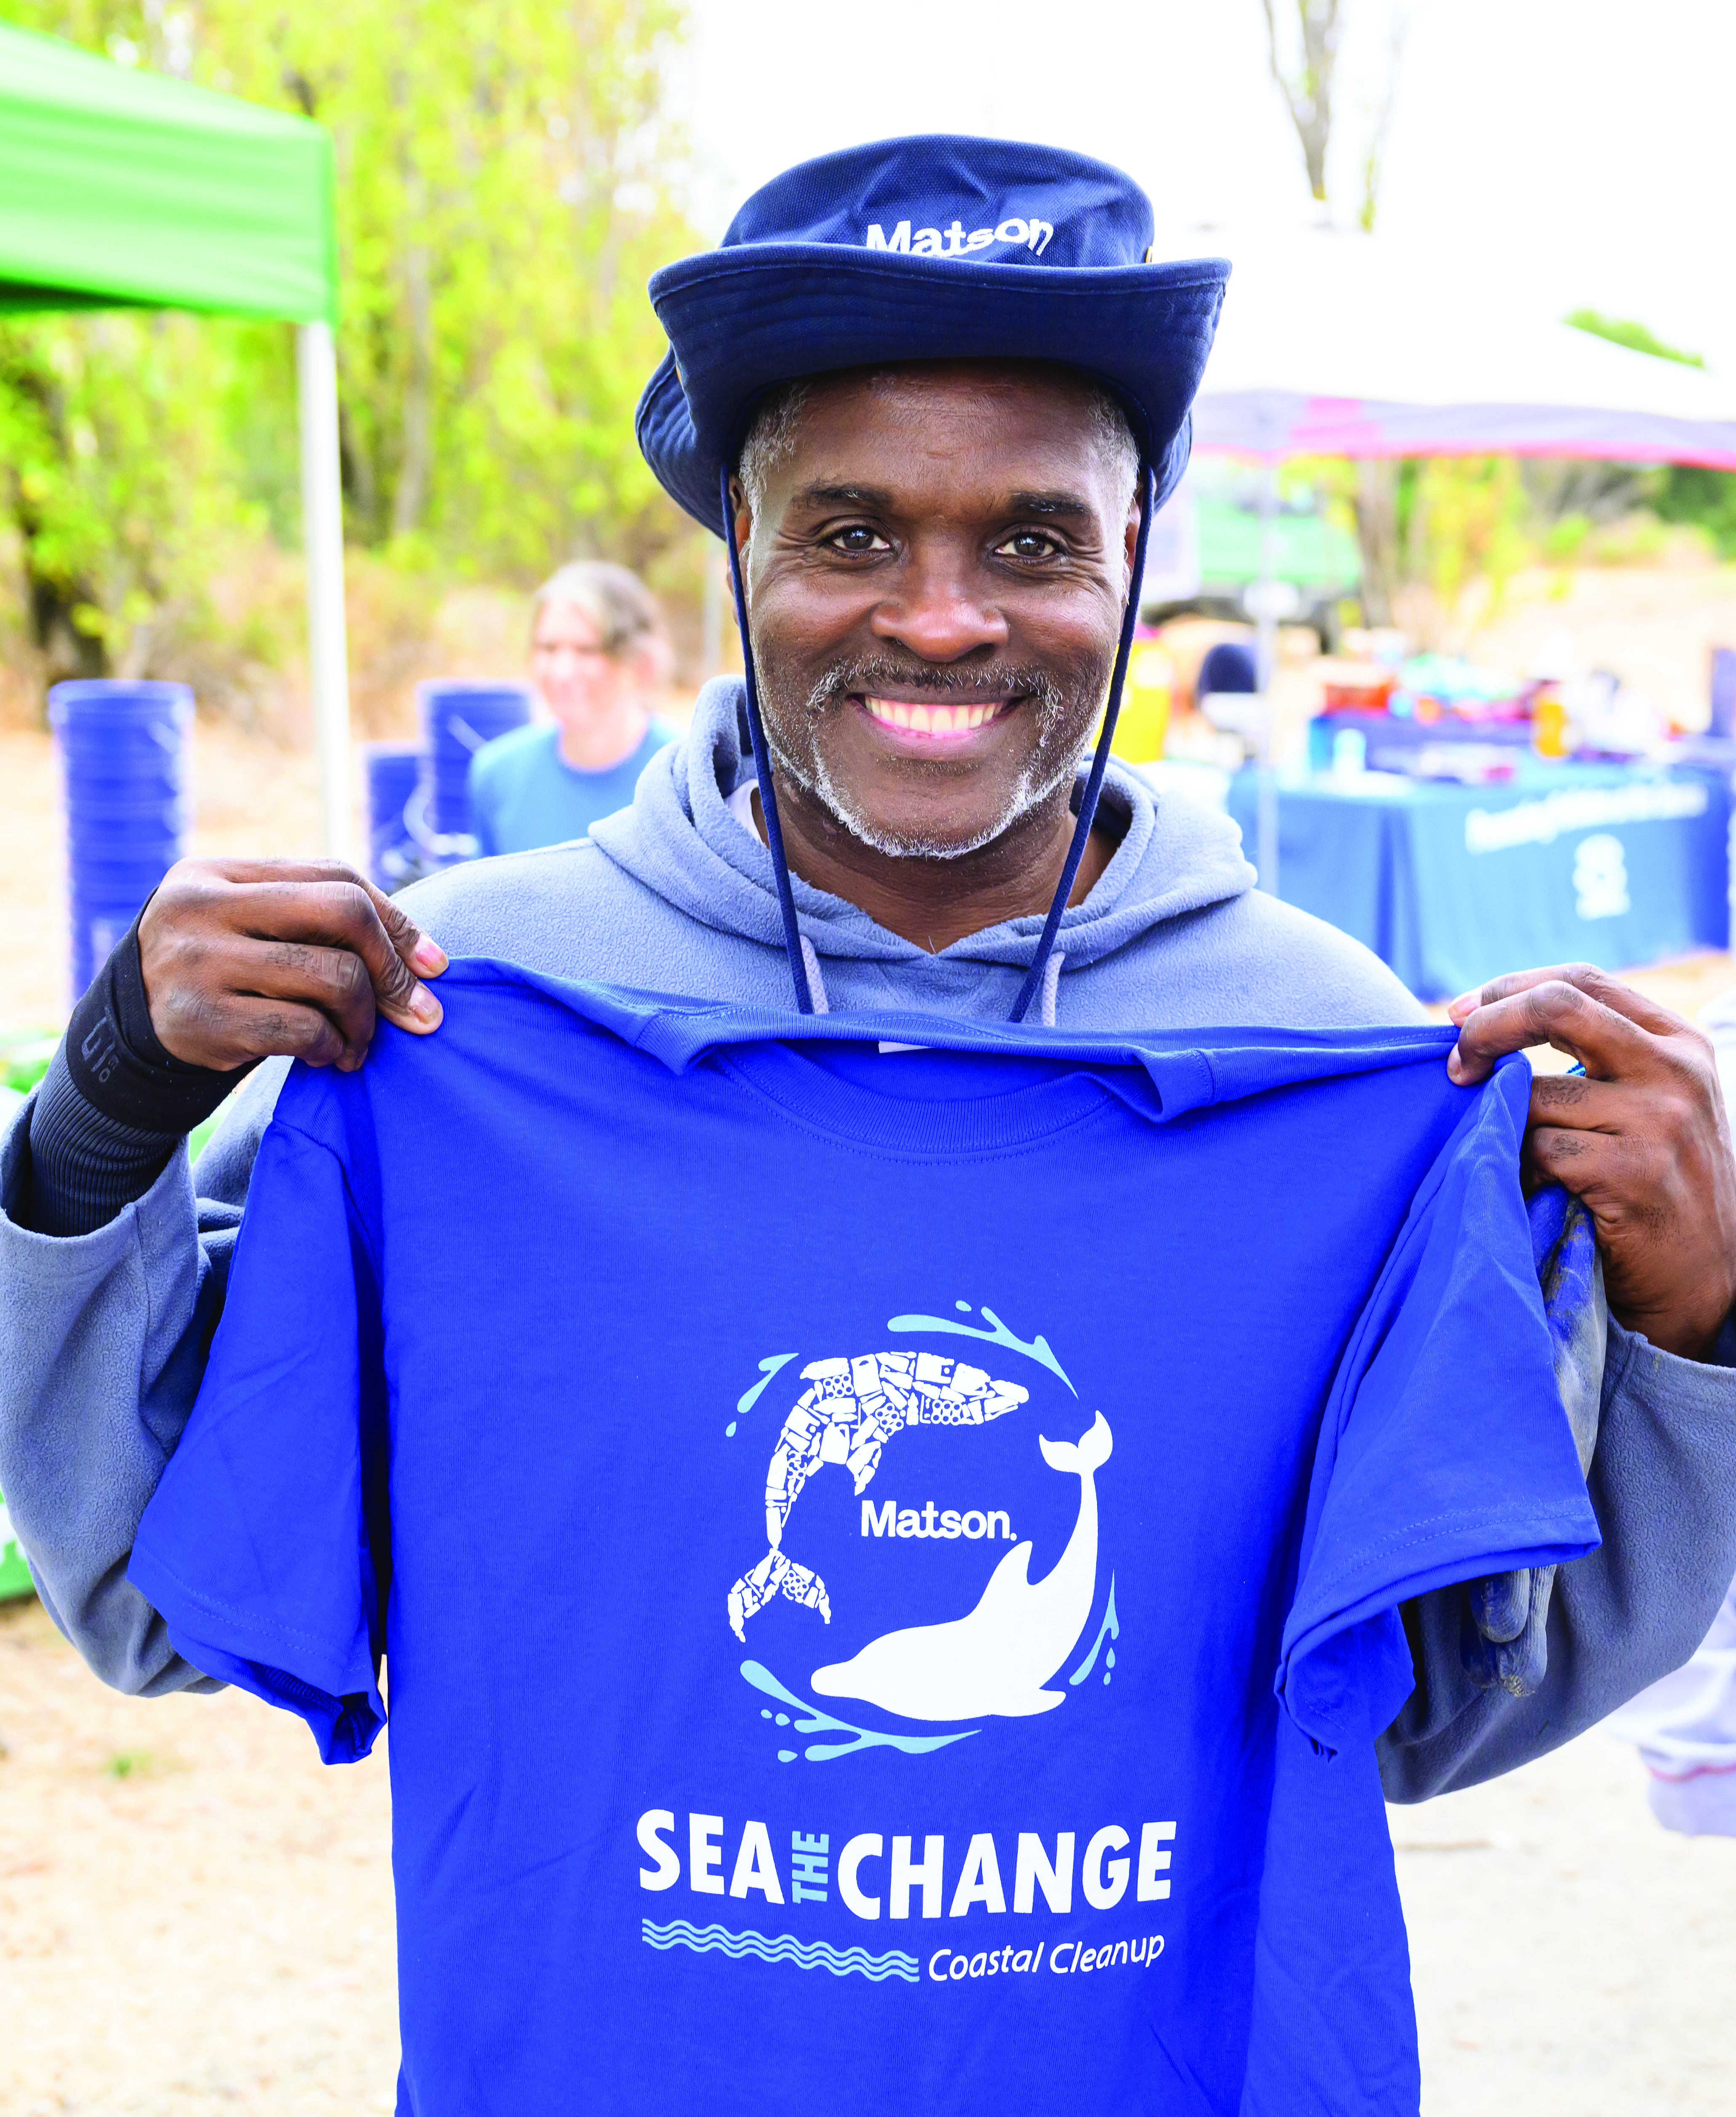 Volunteer wears a blue Matson branded hand and holds up a blue t-shirt printed with two dolphins encircling a Matson logo and the words "Sea The Change."